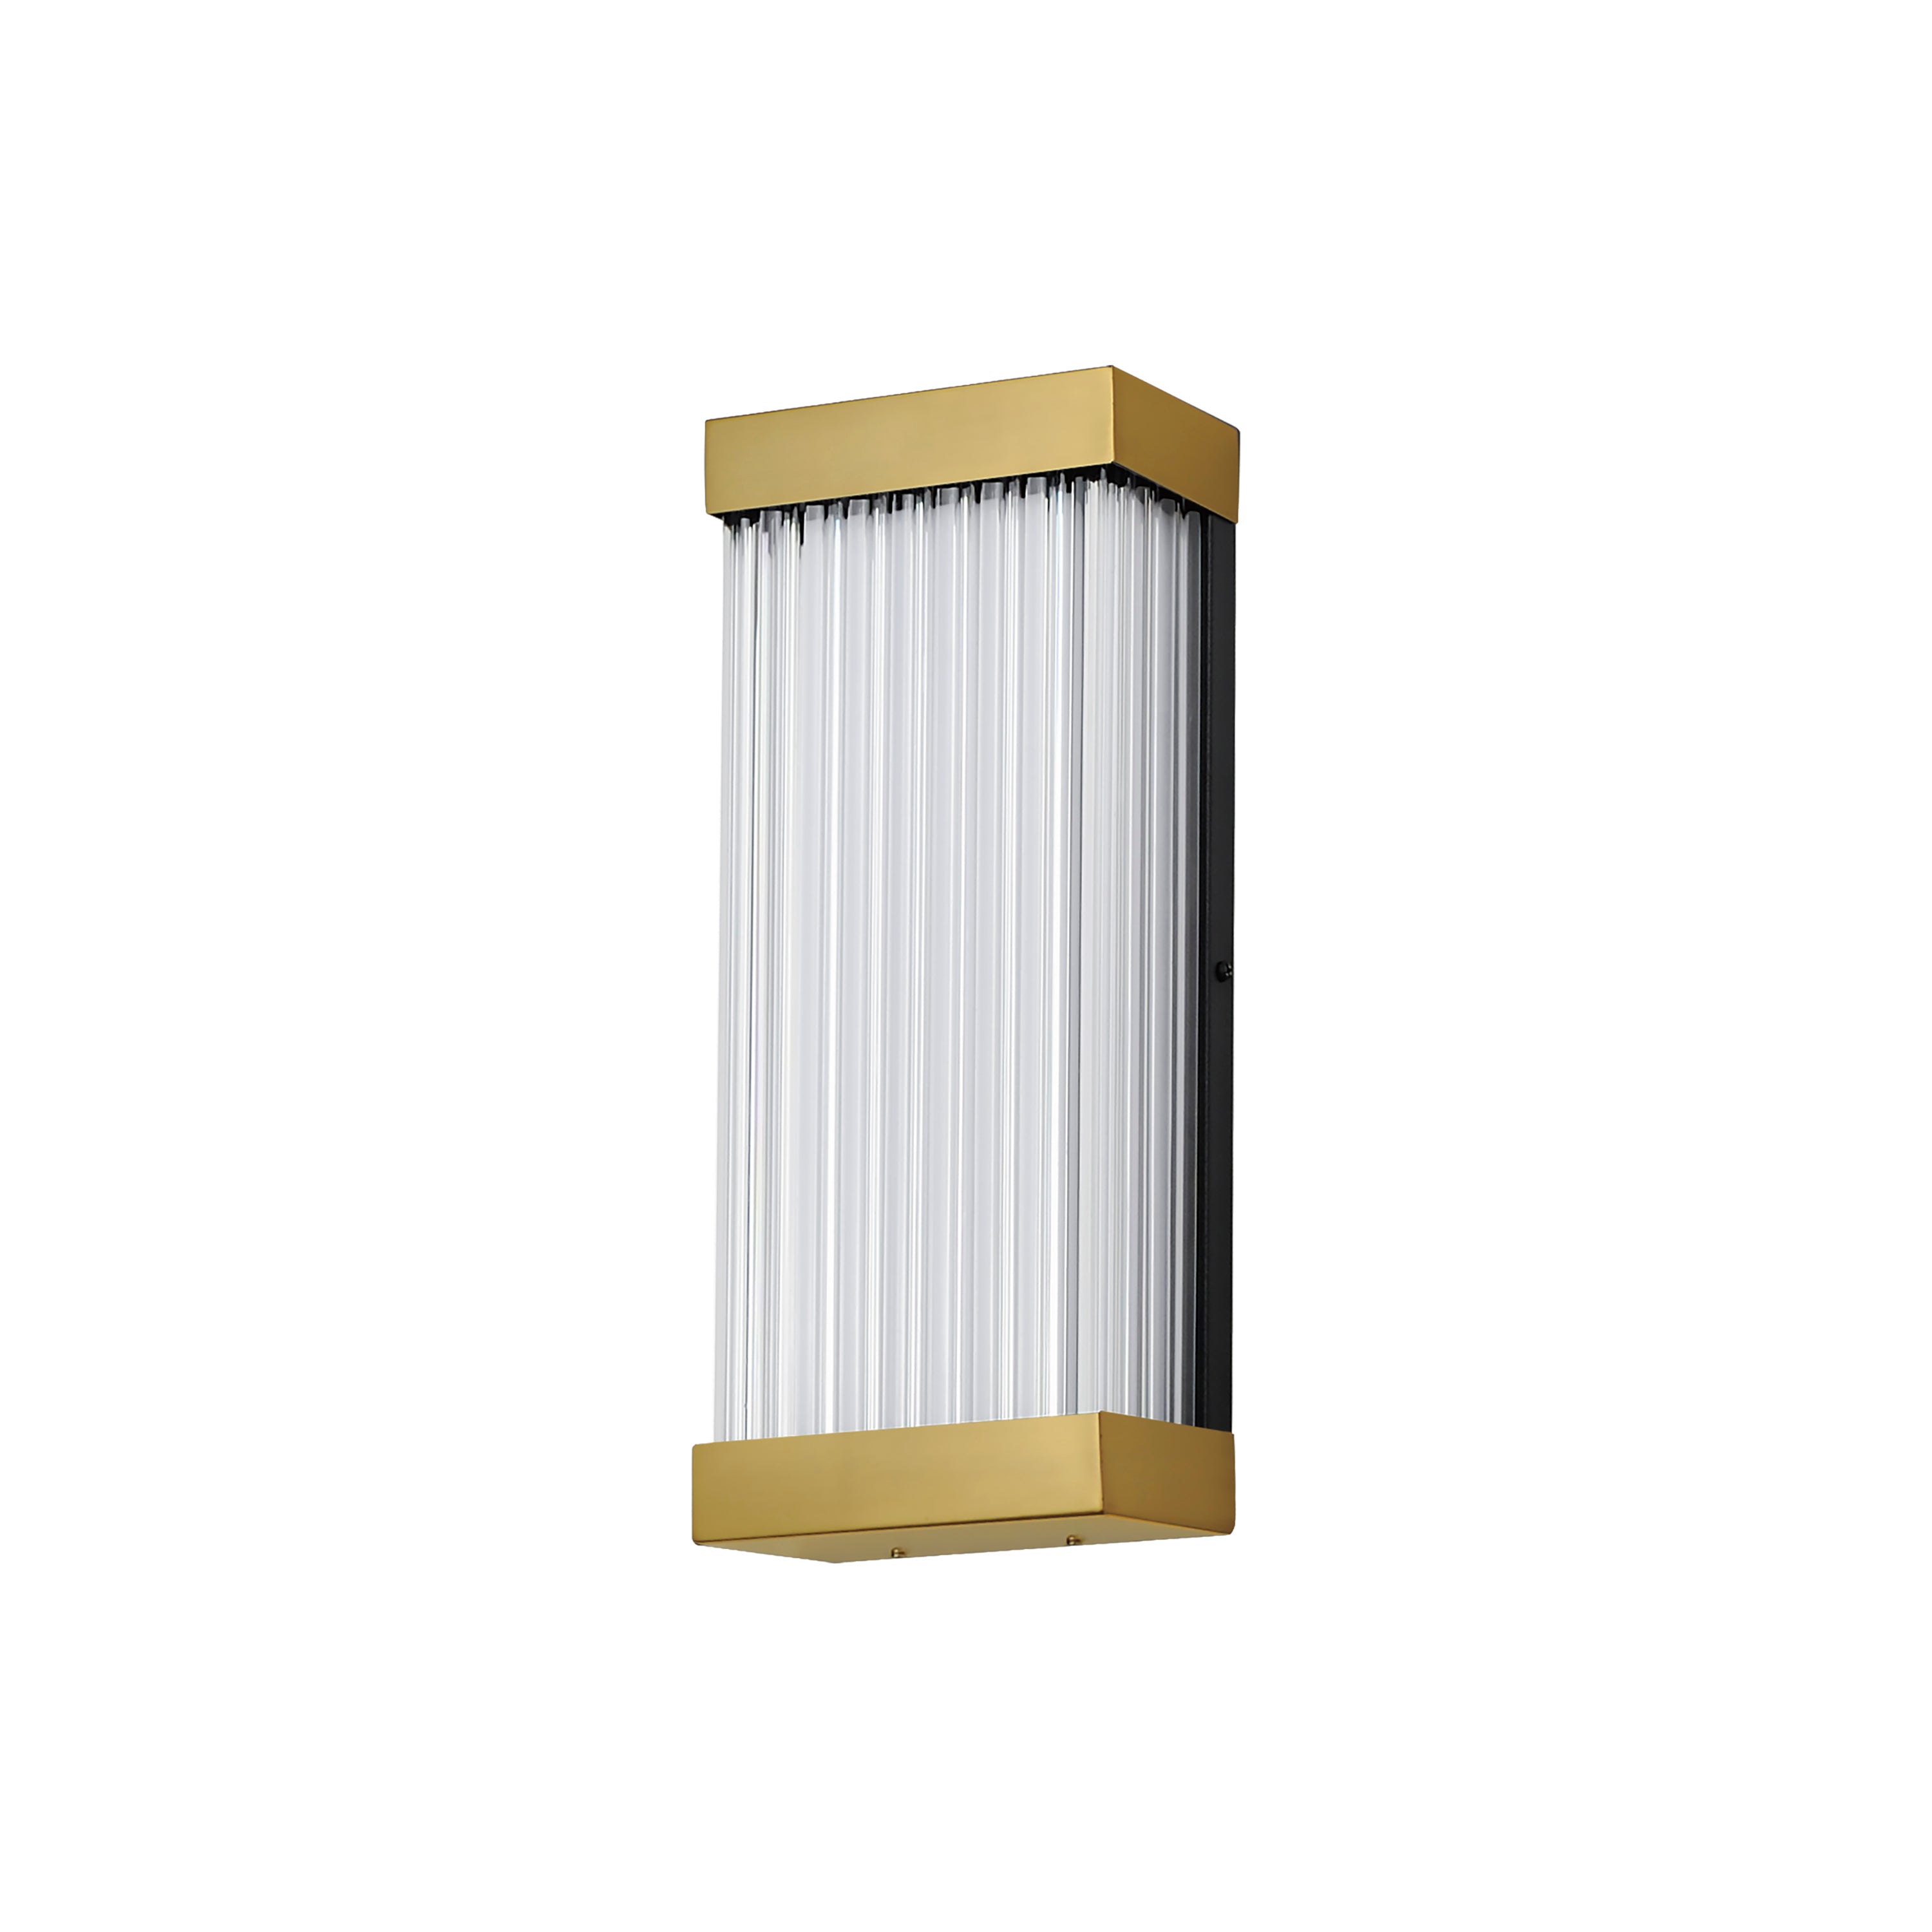 Acropolis-Outdoor Wall Mount Outdoor l Wall ET2 x6x14 Natural Aged Brass 